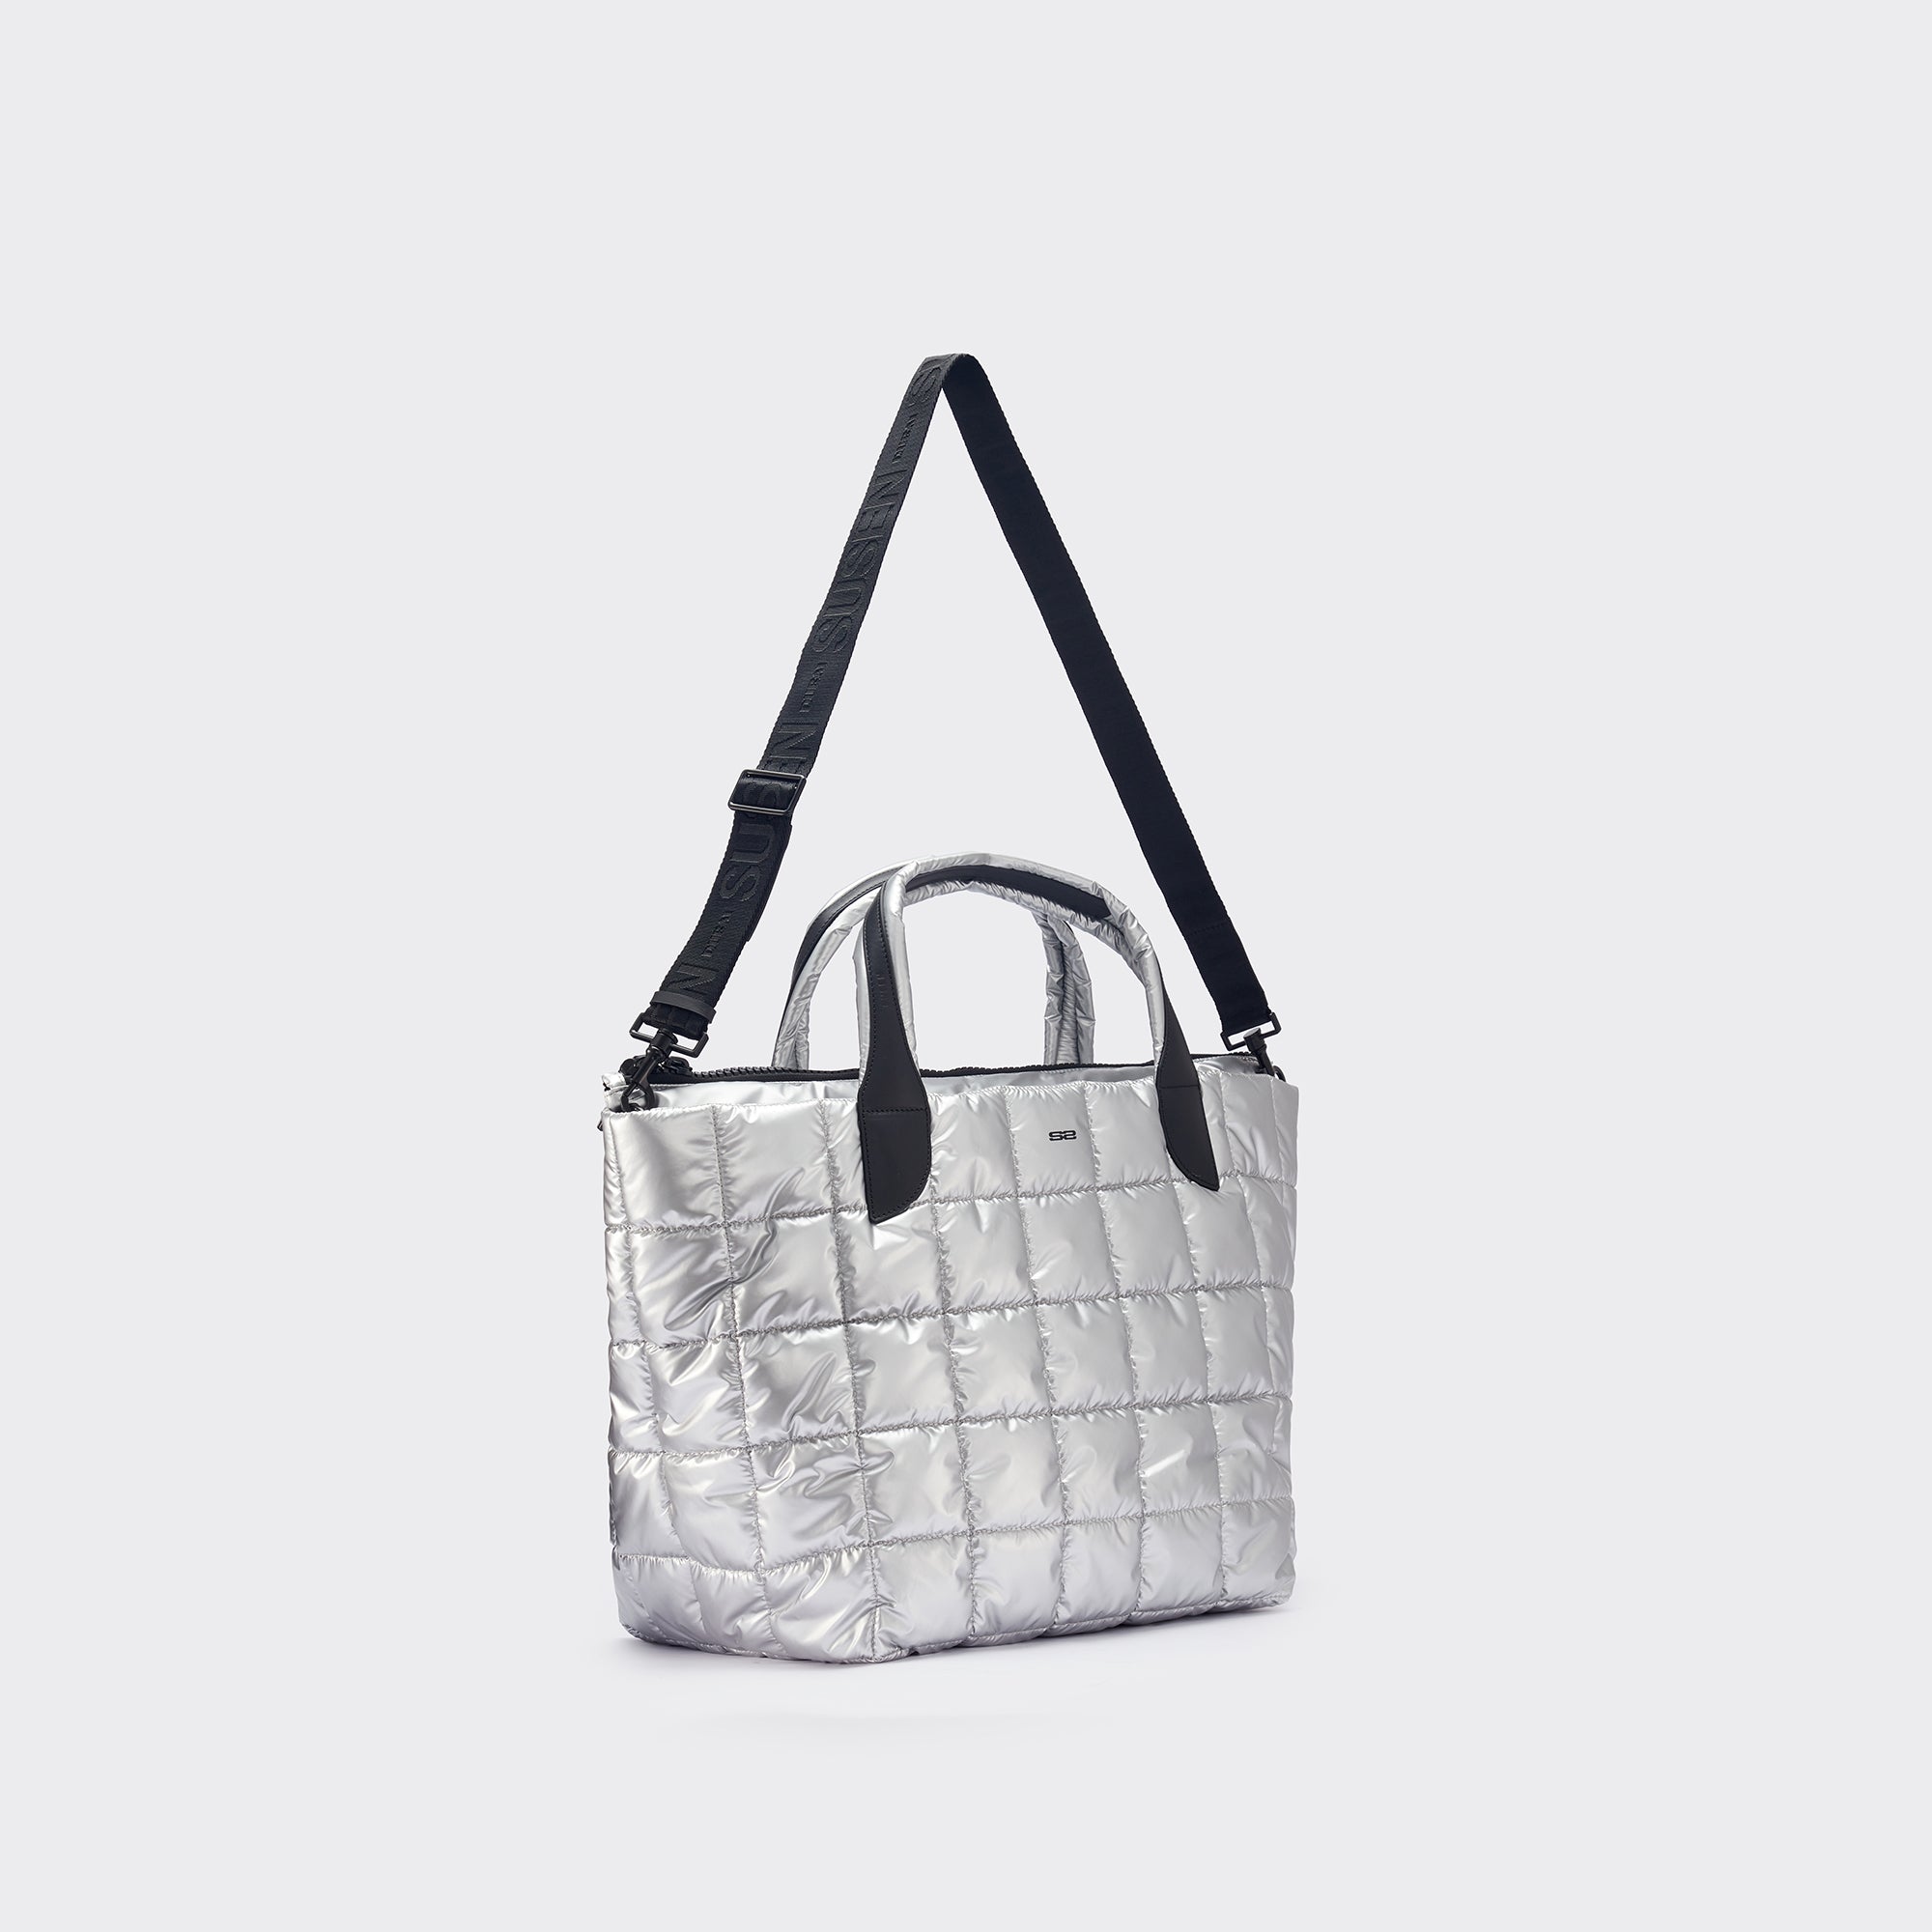 Raphael Large size Tote - silver